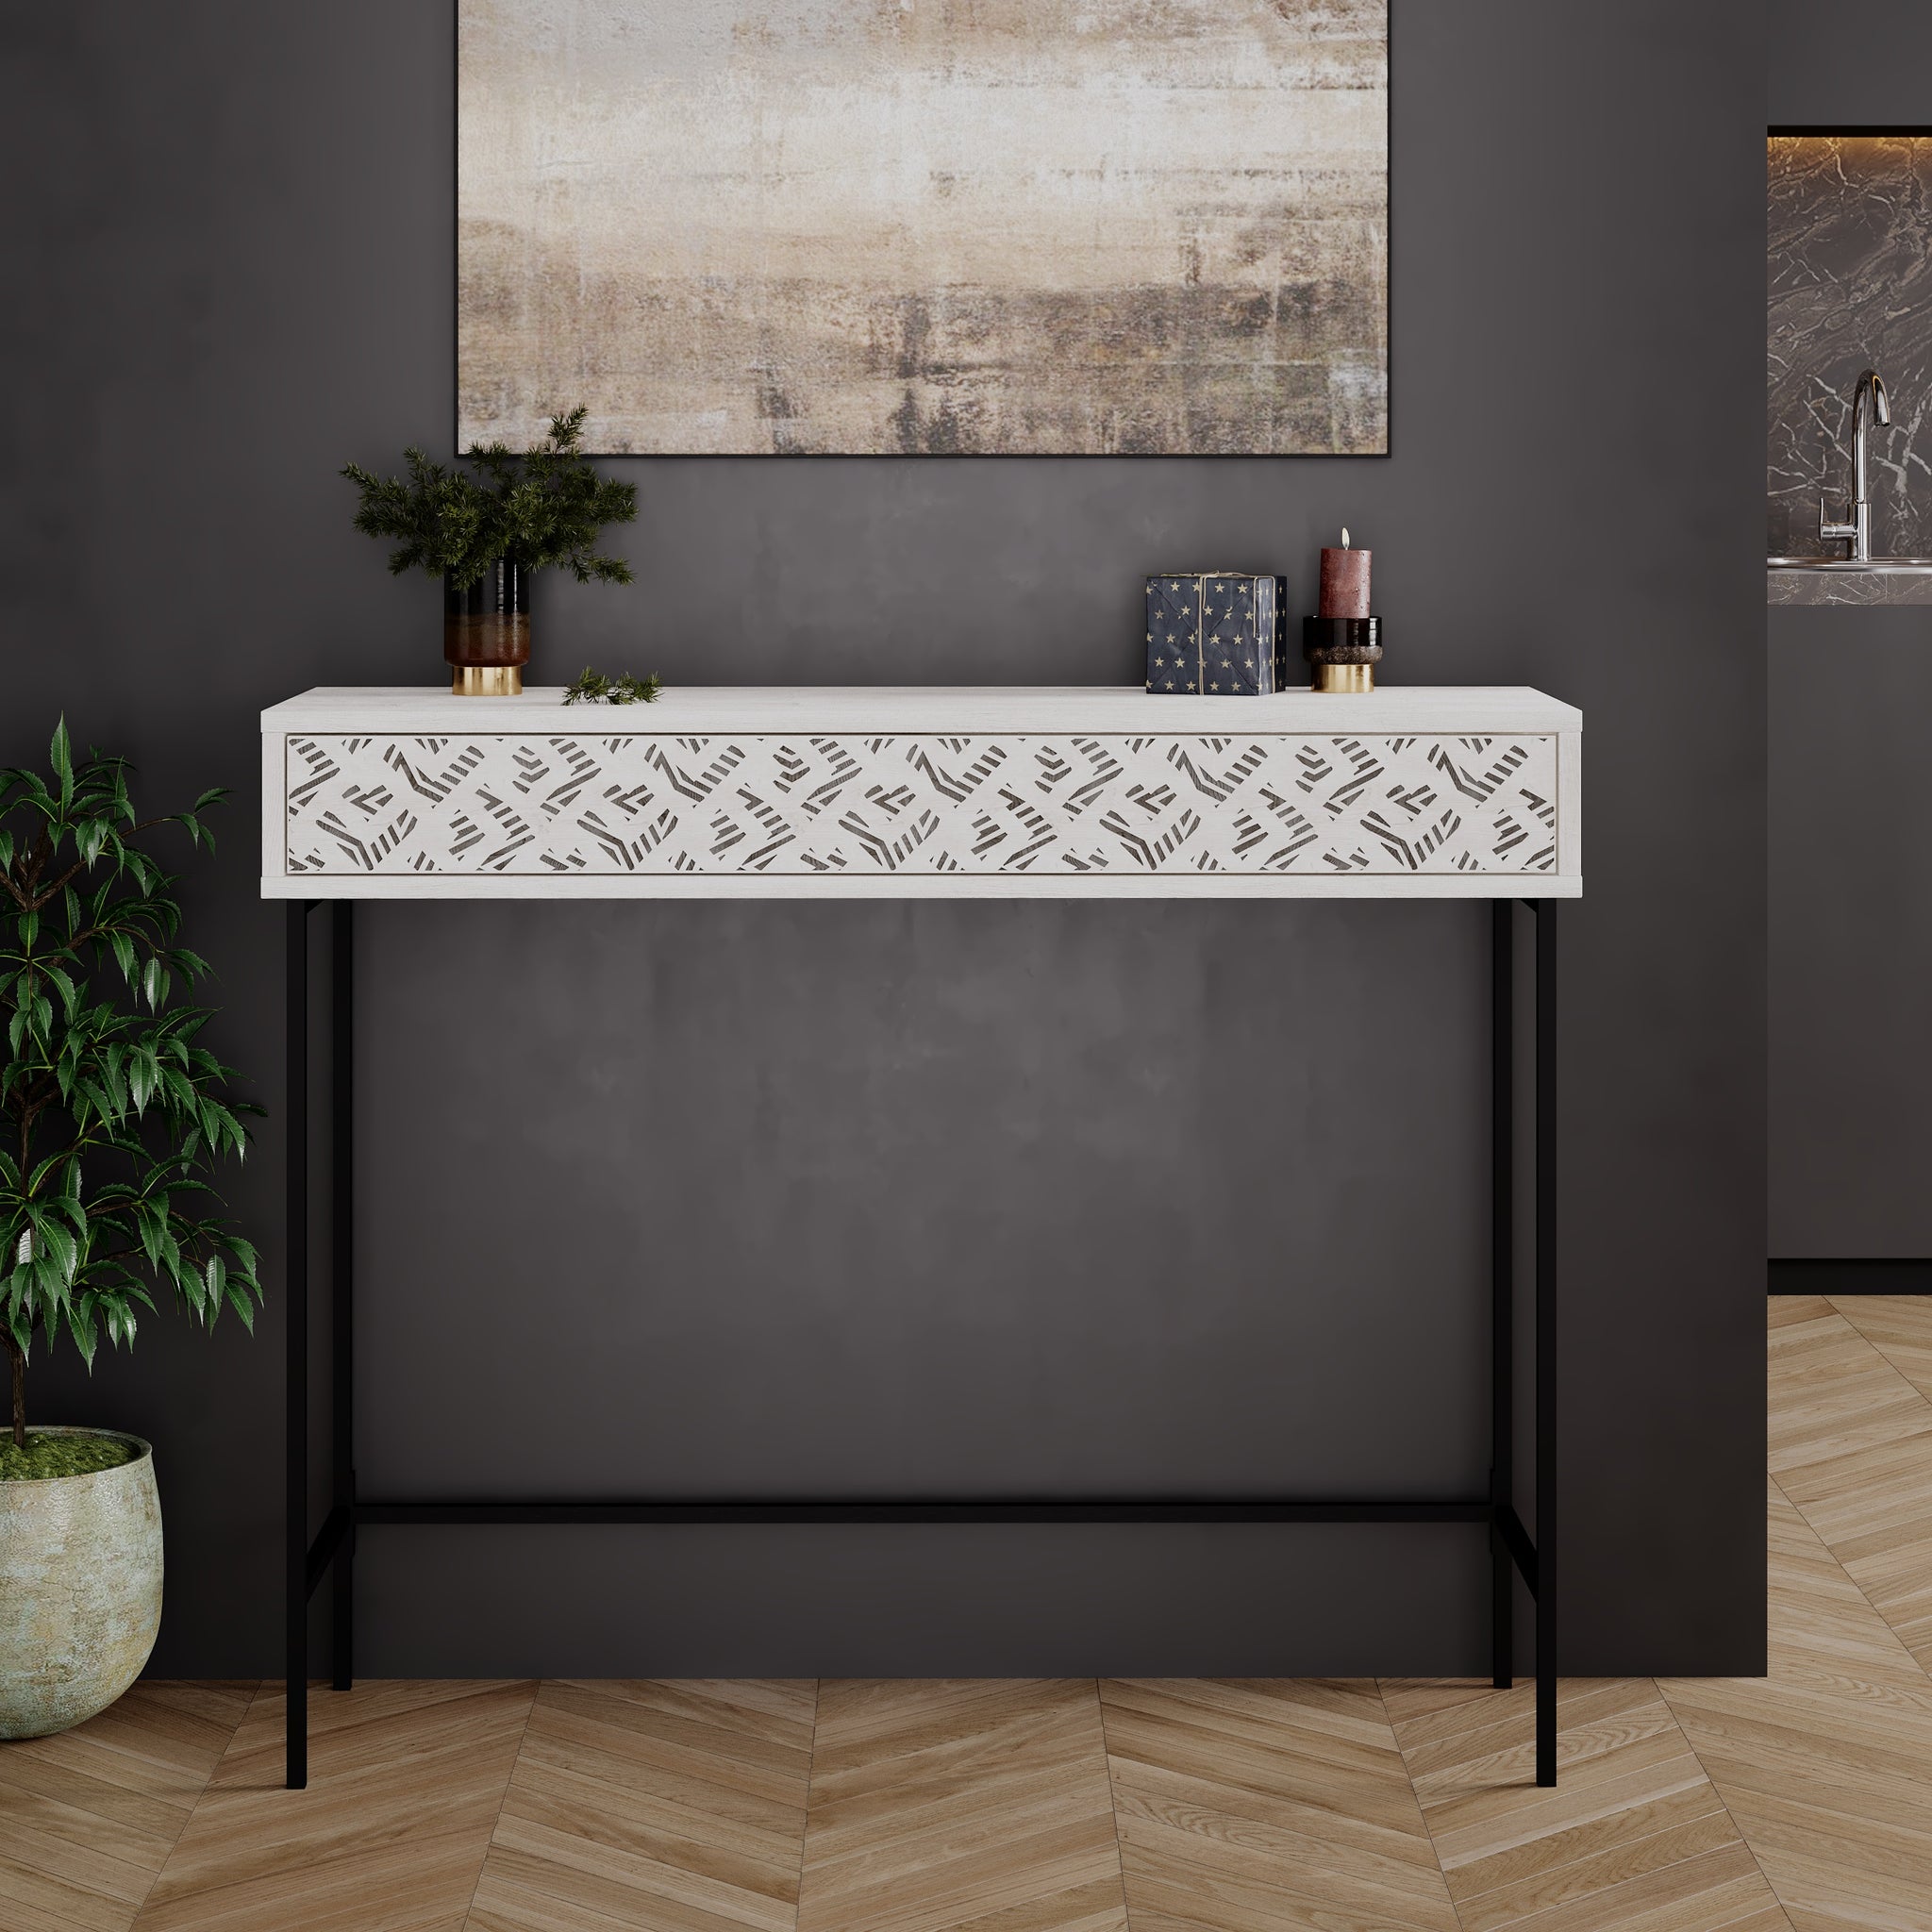 Elegant Wooden Console Table: A Perfect Blend of Style and Function, White